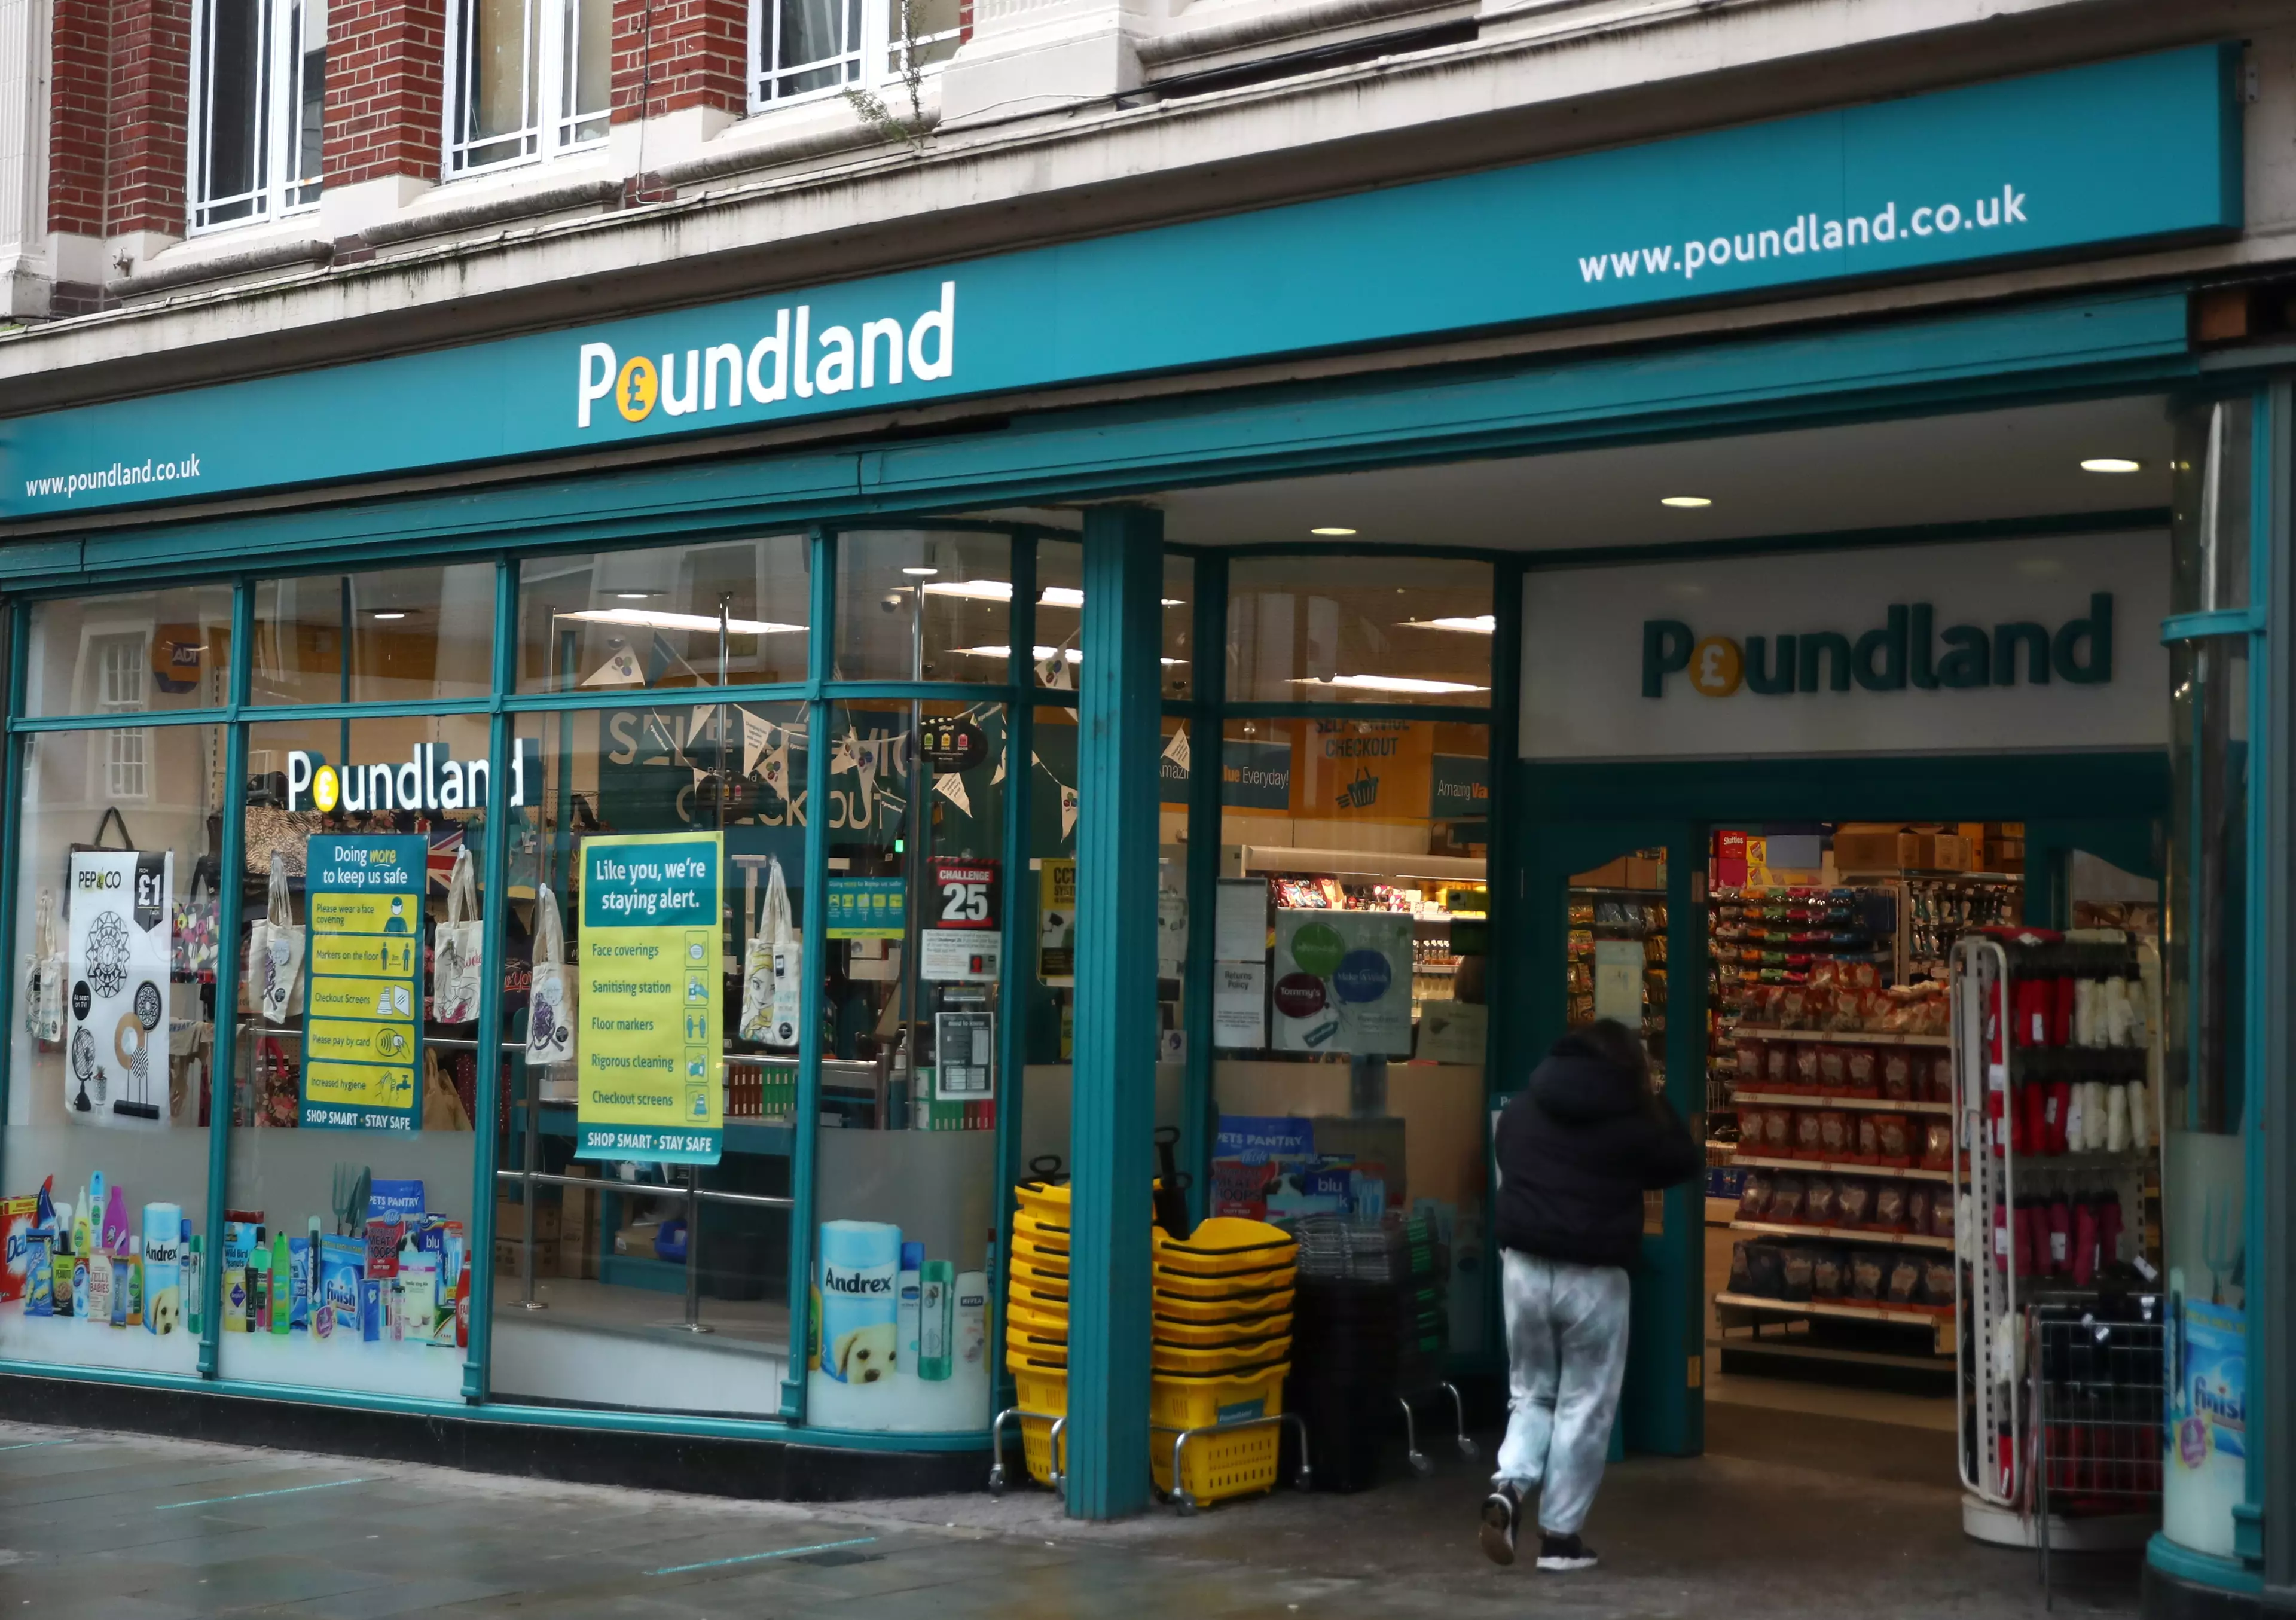 Will you be heading to Poundland for an engagement ring? (